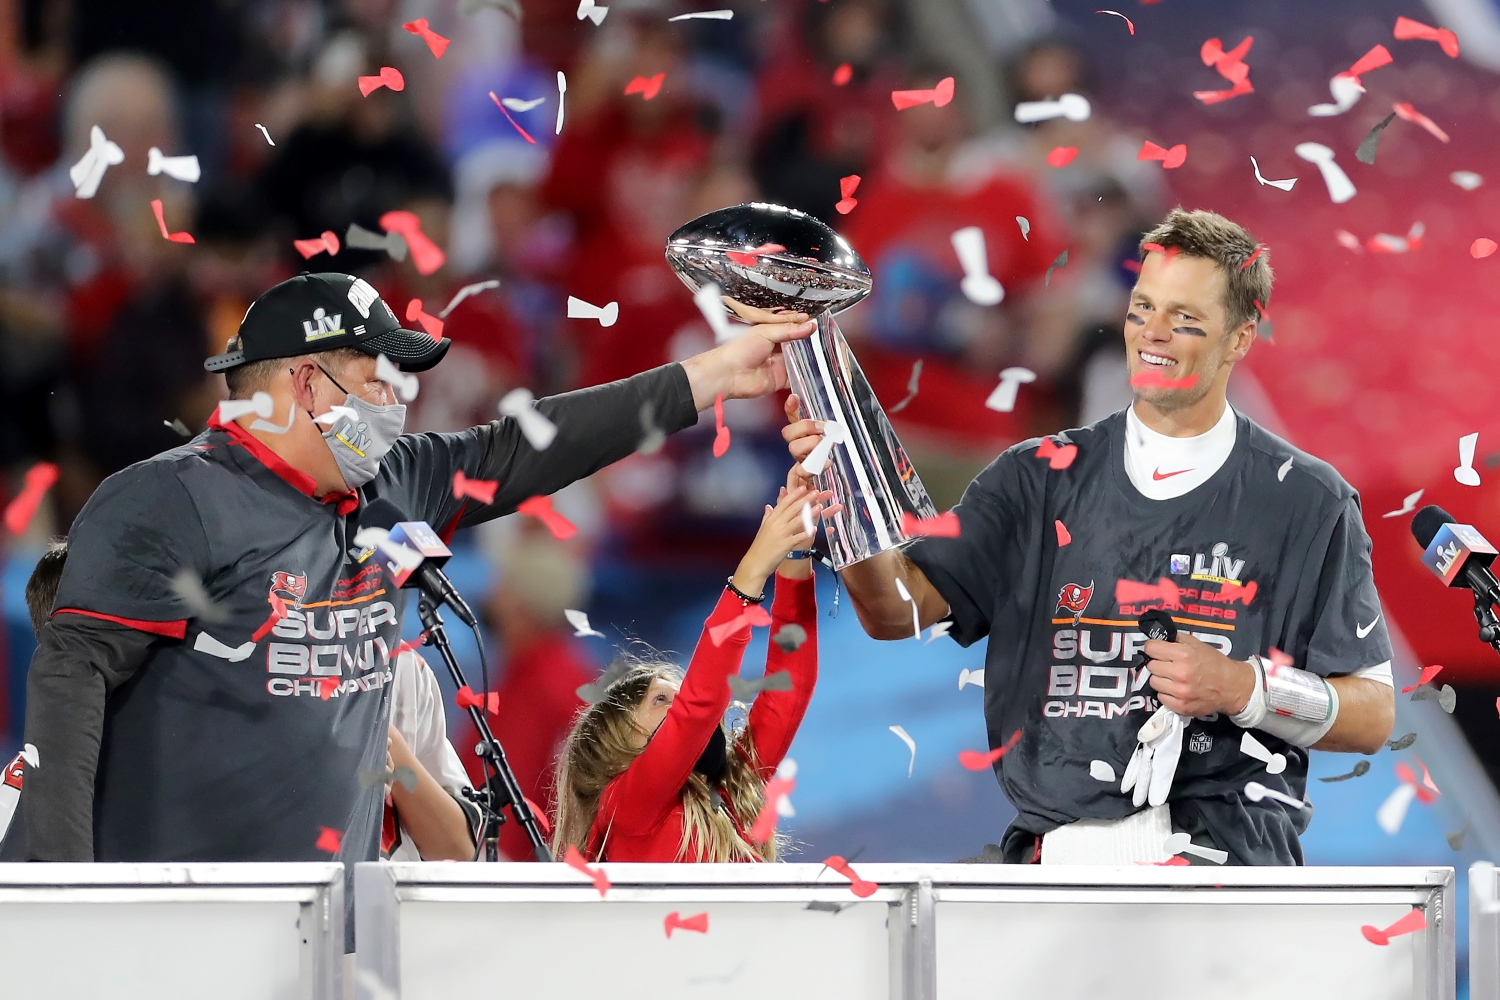 Tampa Bay Buccaneers general manager Jason Licht hands the Lombardi Trophy to Tom Brady.